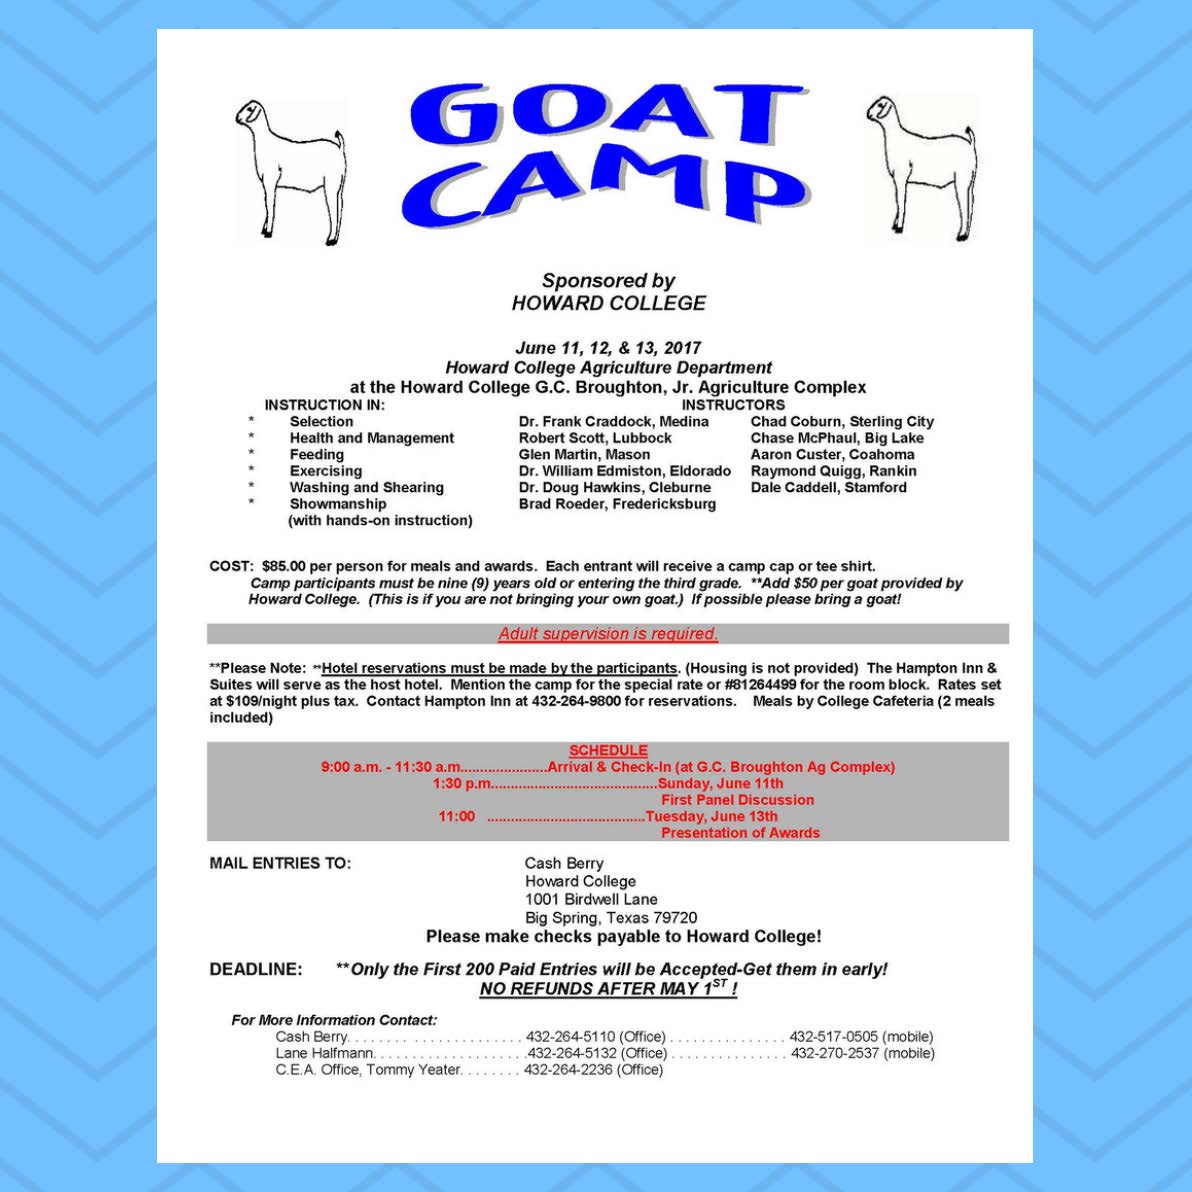 Lamb & Goat Camp hosted by Howard College in Big Spring, TX.  Only 200 entries are accepted.